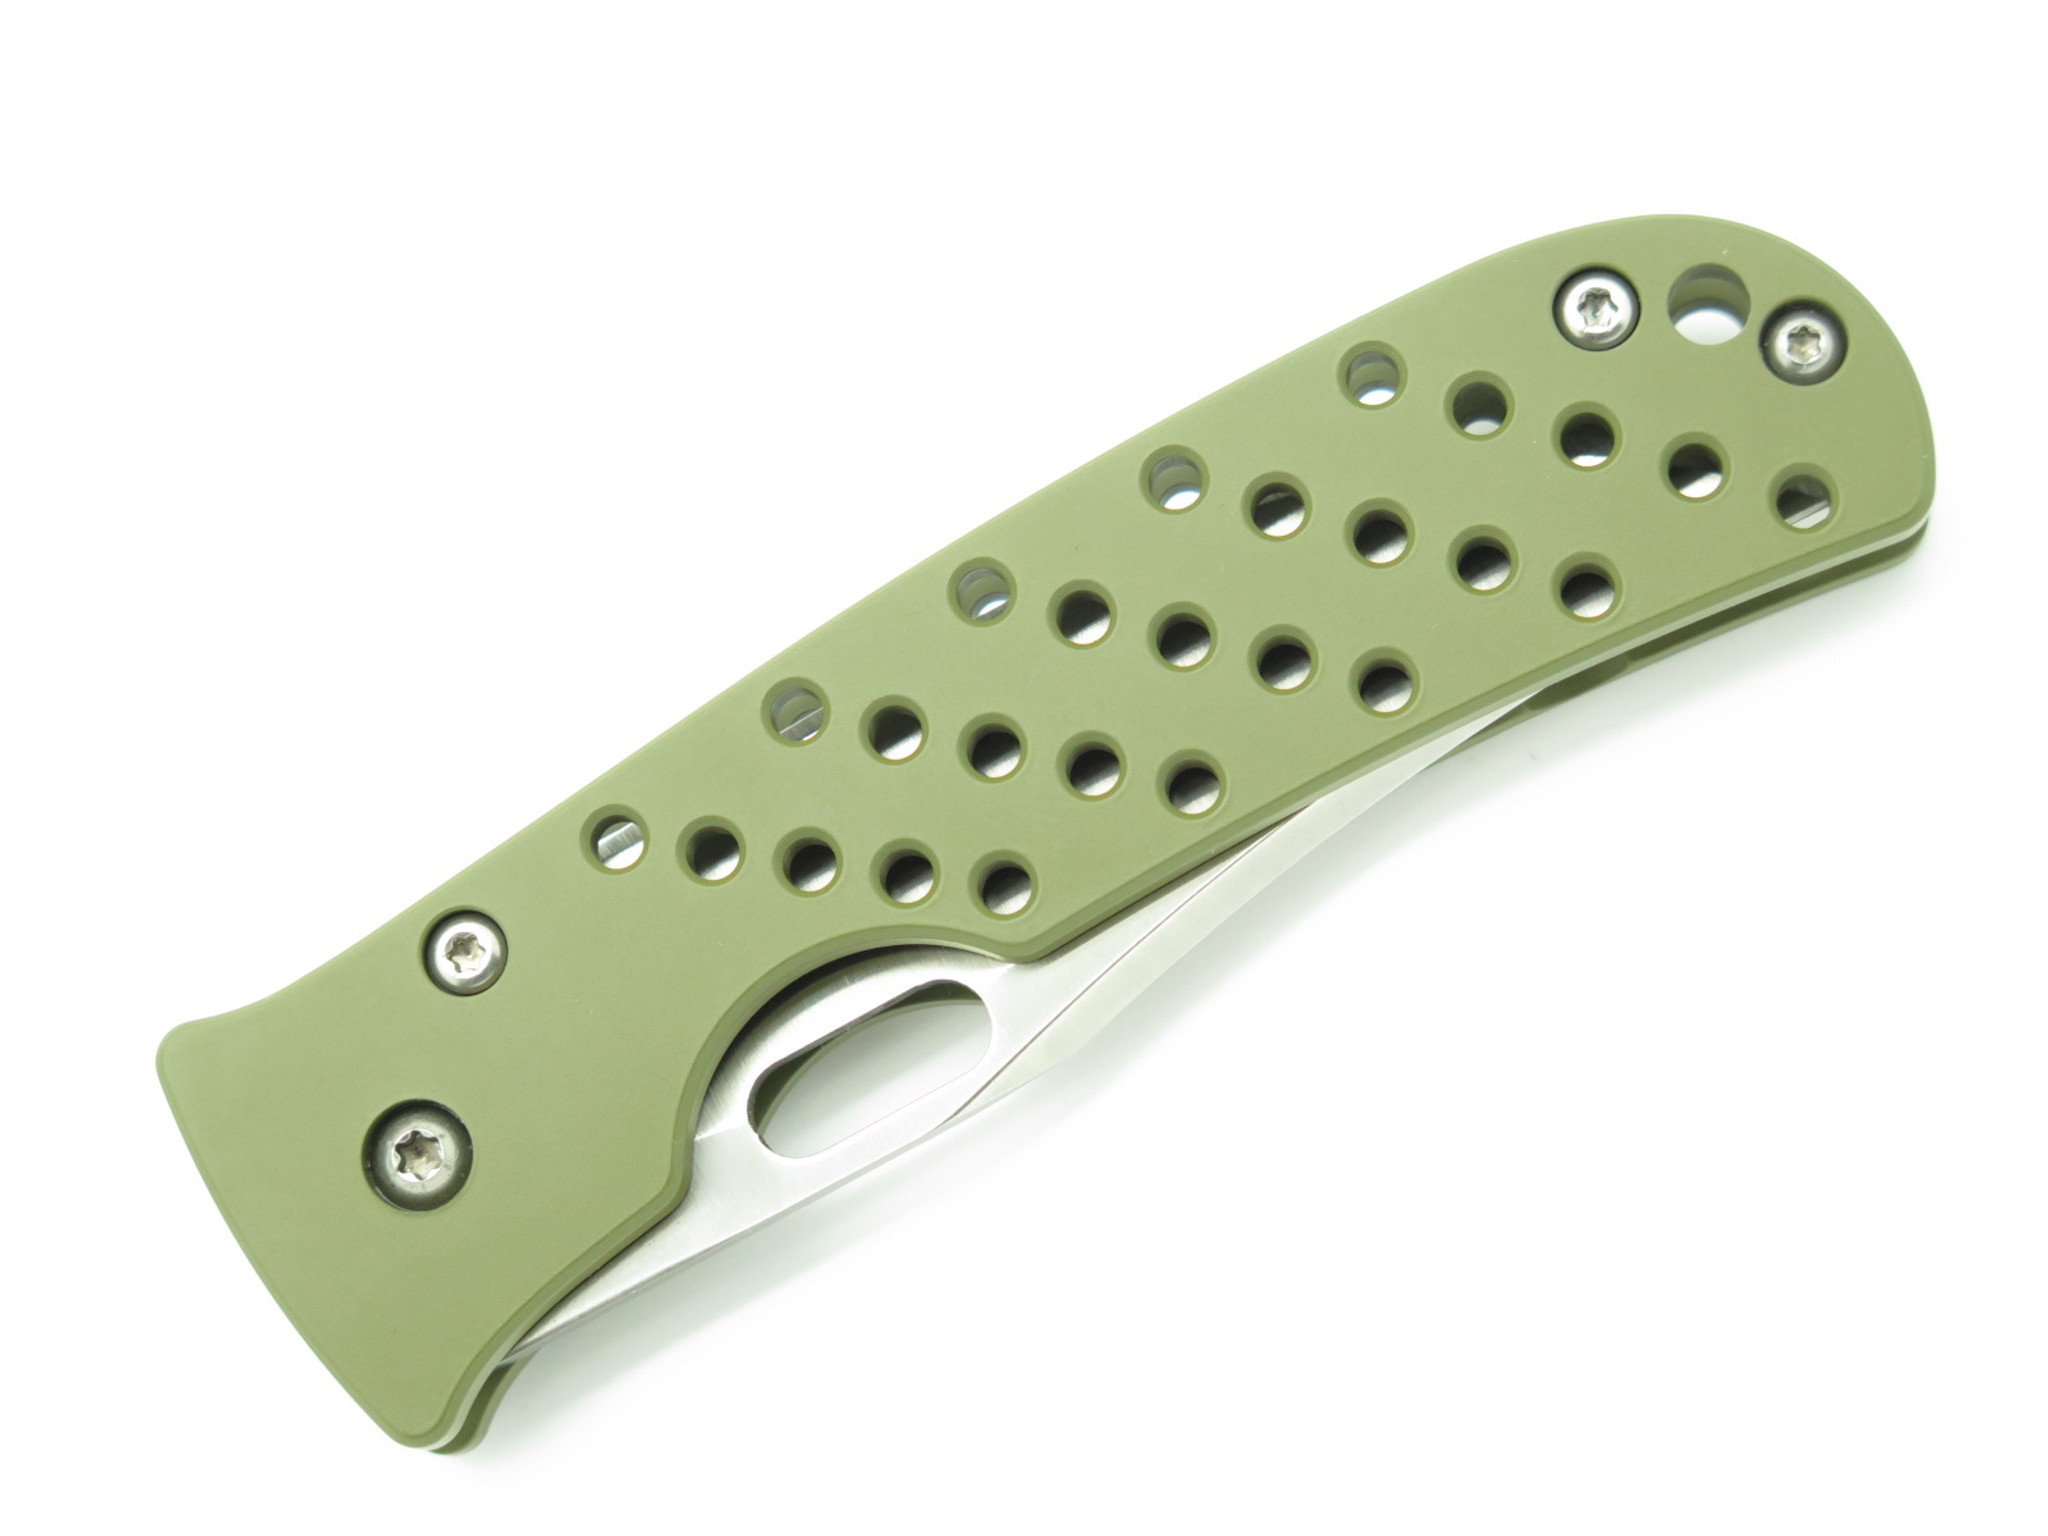 Buck 934 Small Paring Kitchen Knife - Buck® Knives OFFICIAL SITE